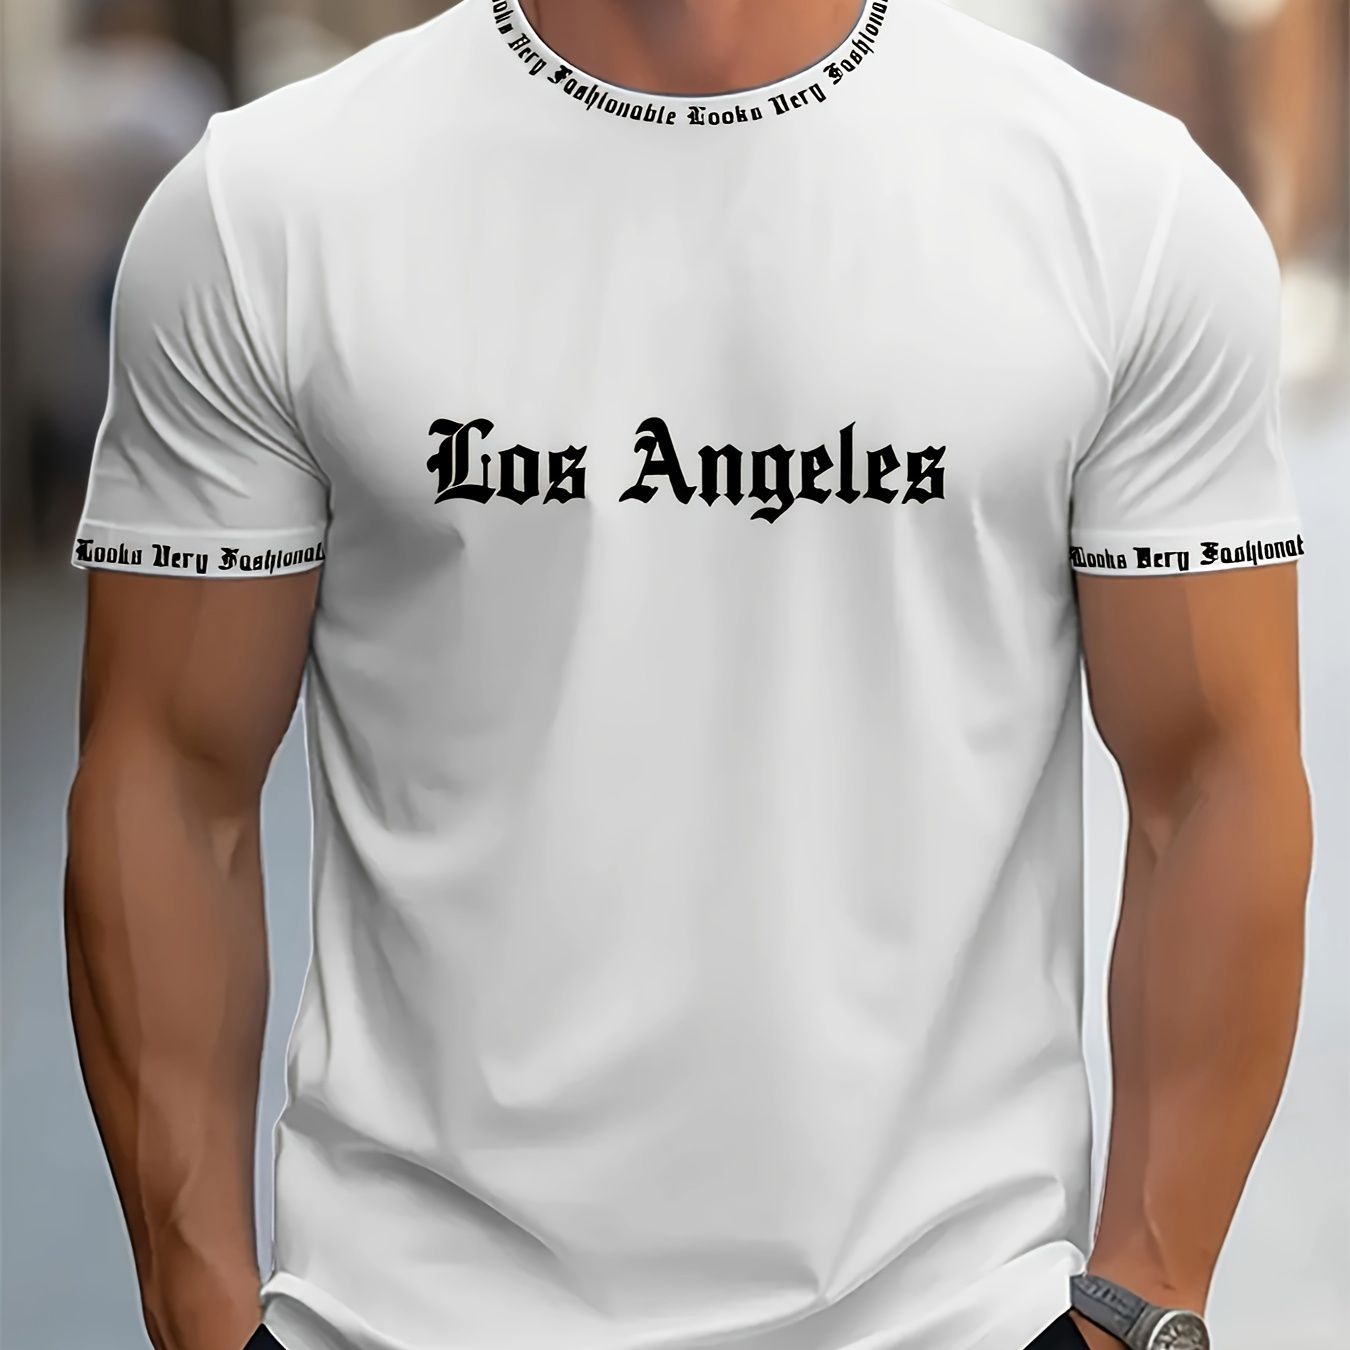 

Los Angeles Print Men's Crew Neck Fashionable Short Sleeve Sports T-shirt, Comfortable And Versatile, For Summer And Spring, Athletic Style, Comfort Fit T-shirt, As Gifts